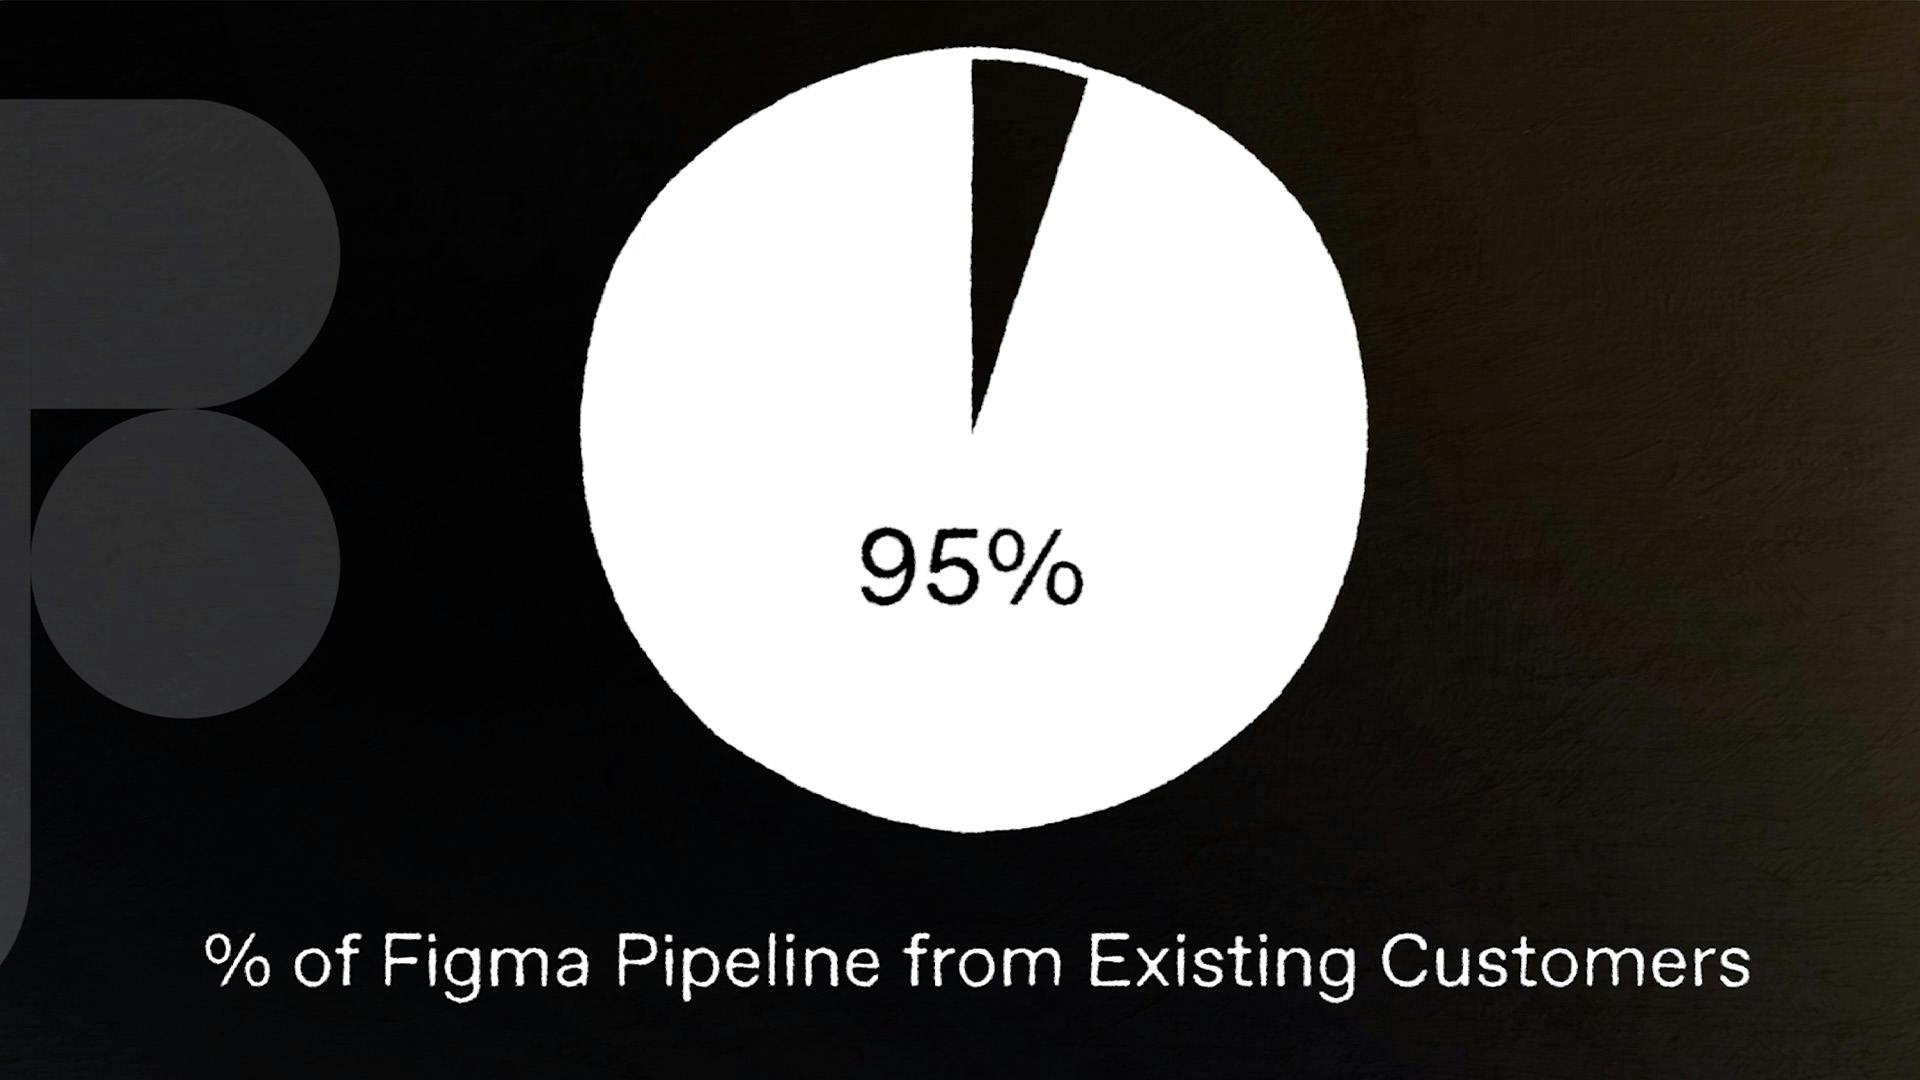 95% of Figma Pipeline from Existing Customers